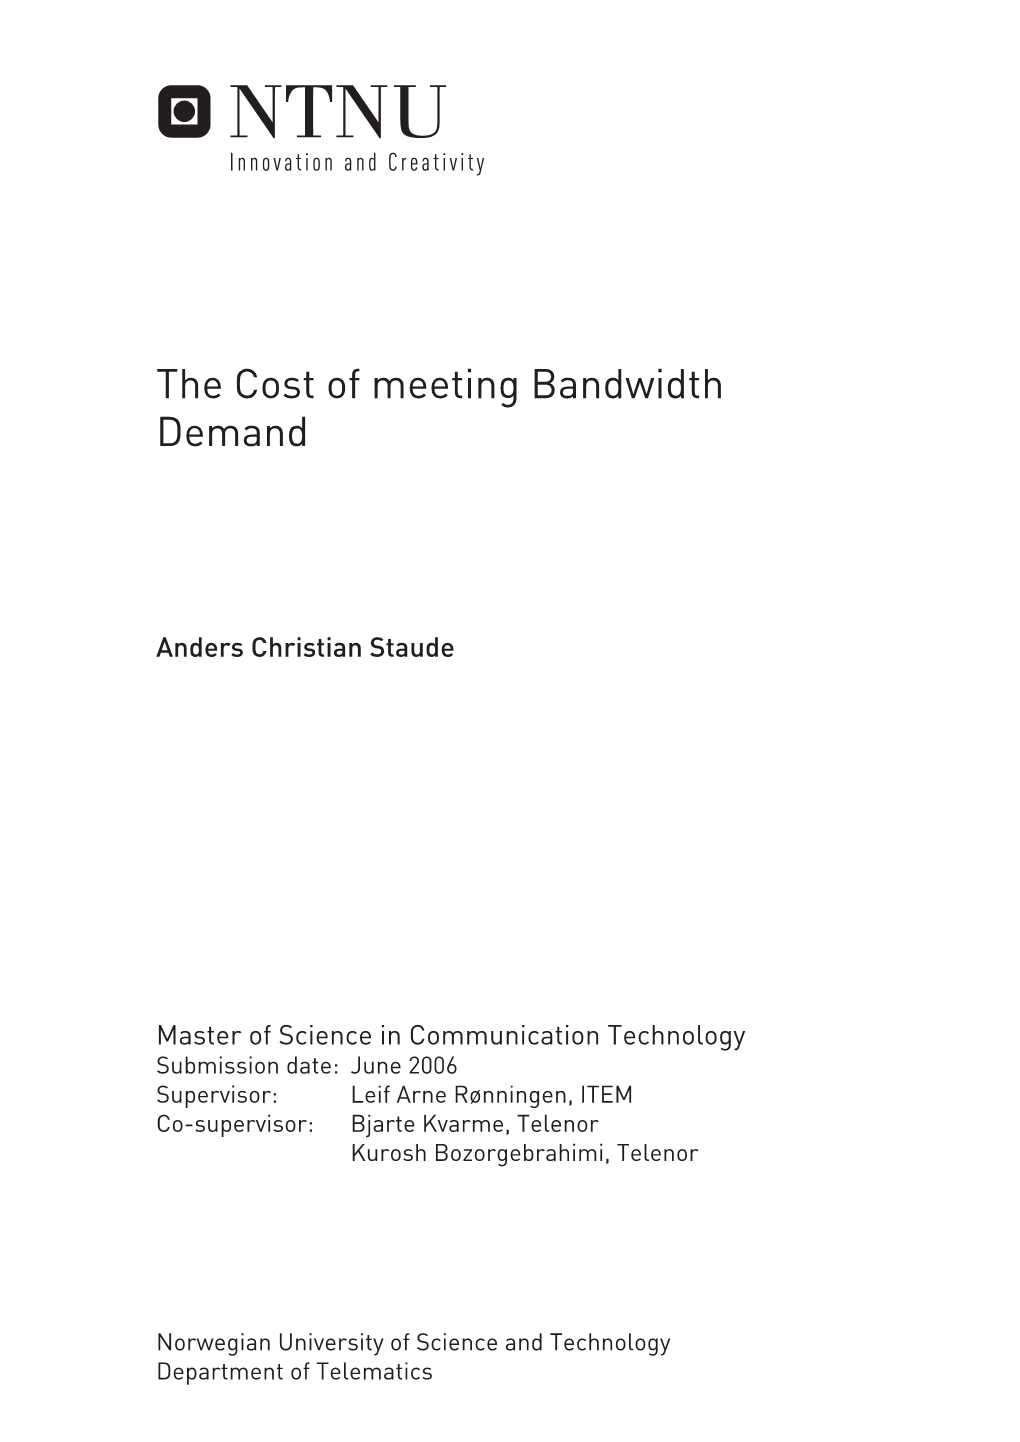 The Cost of Meeting Bandwidth Demand